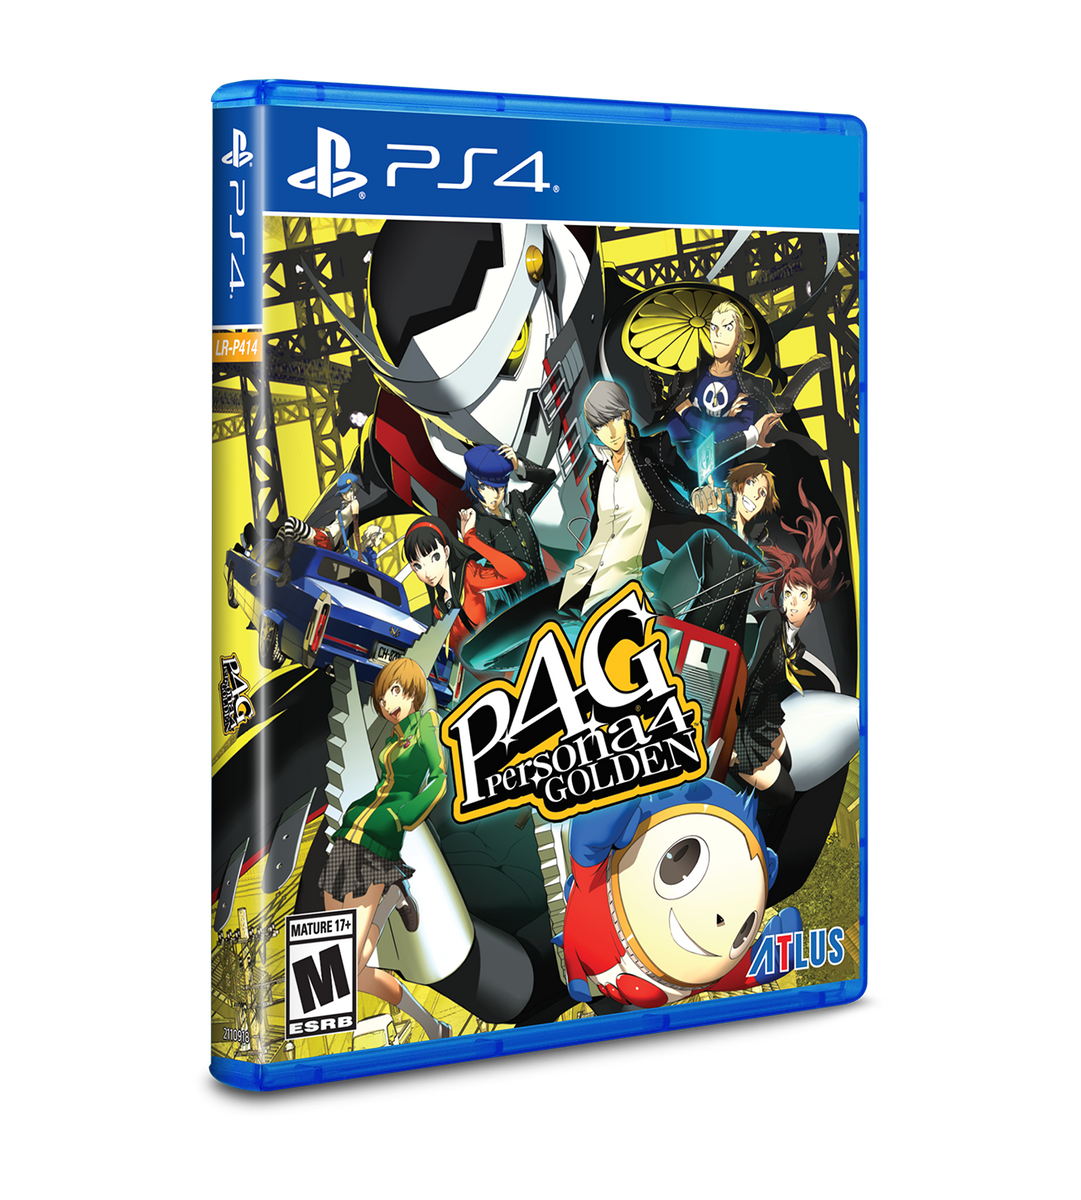 Limited Run #538: Persona 4 Golden (PS4) – Limited Run Games